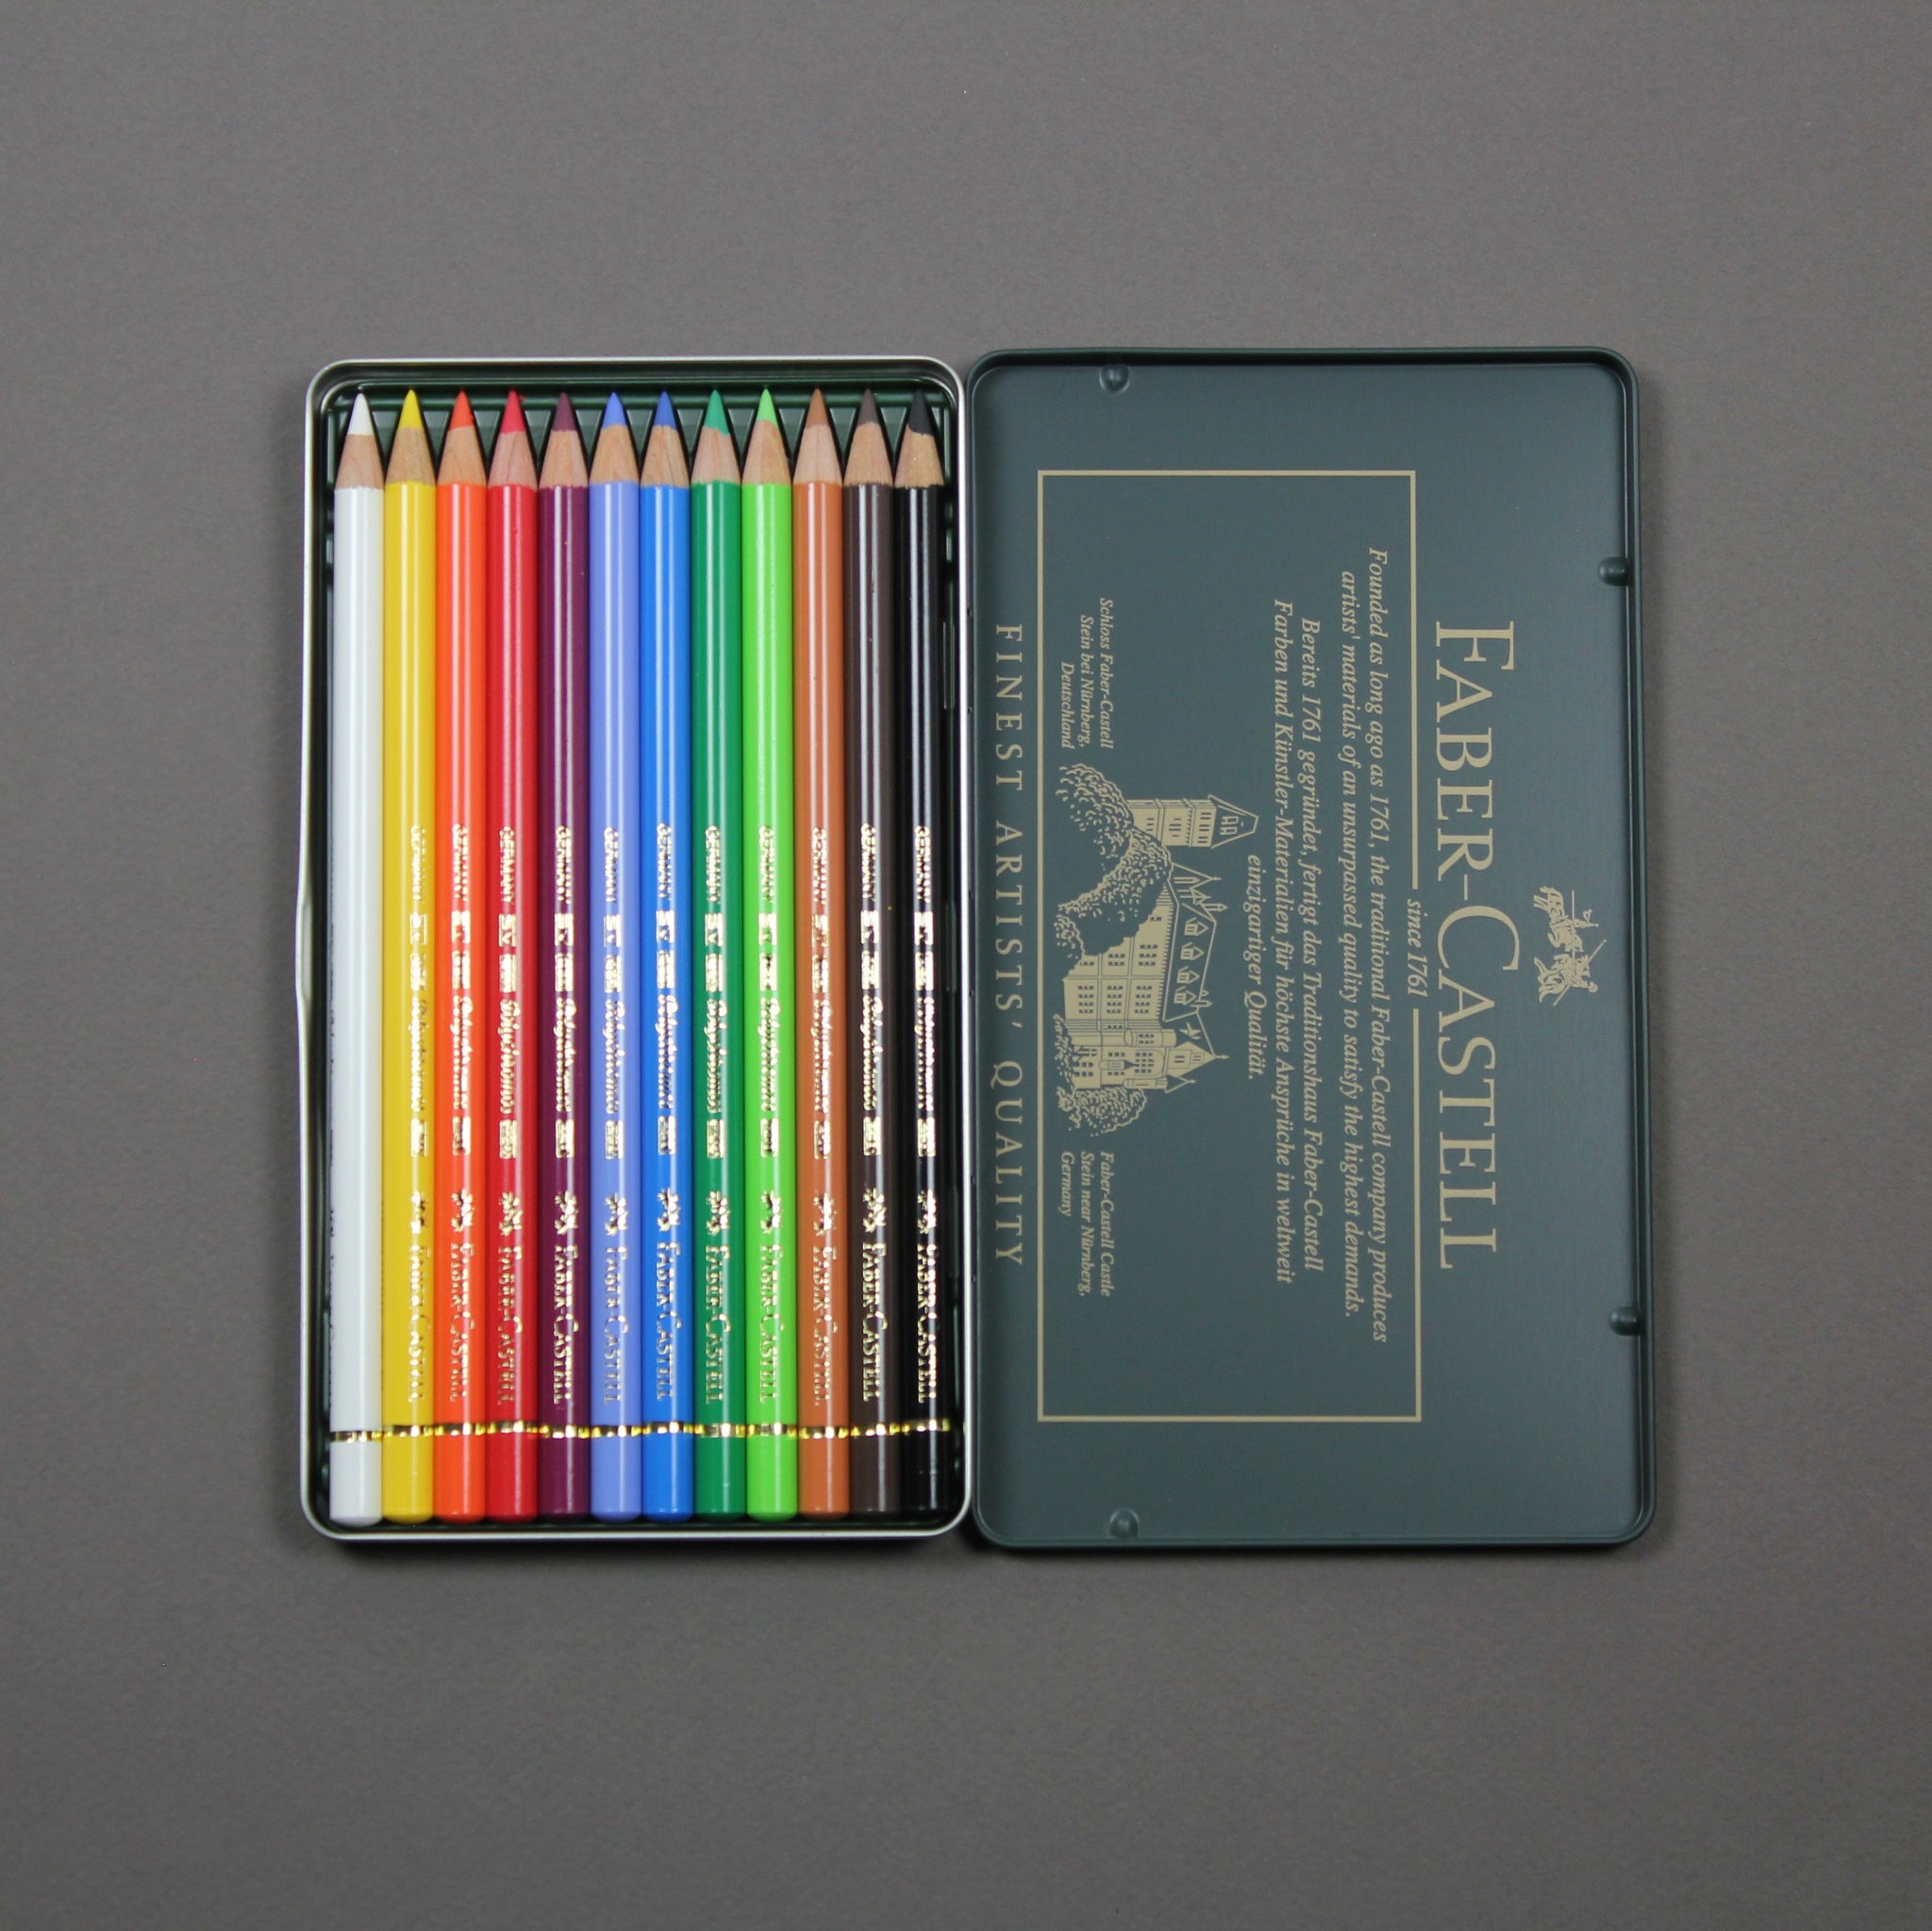 Faber Castell Polychromos for sale